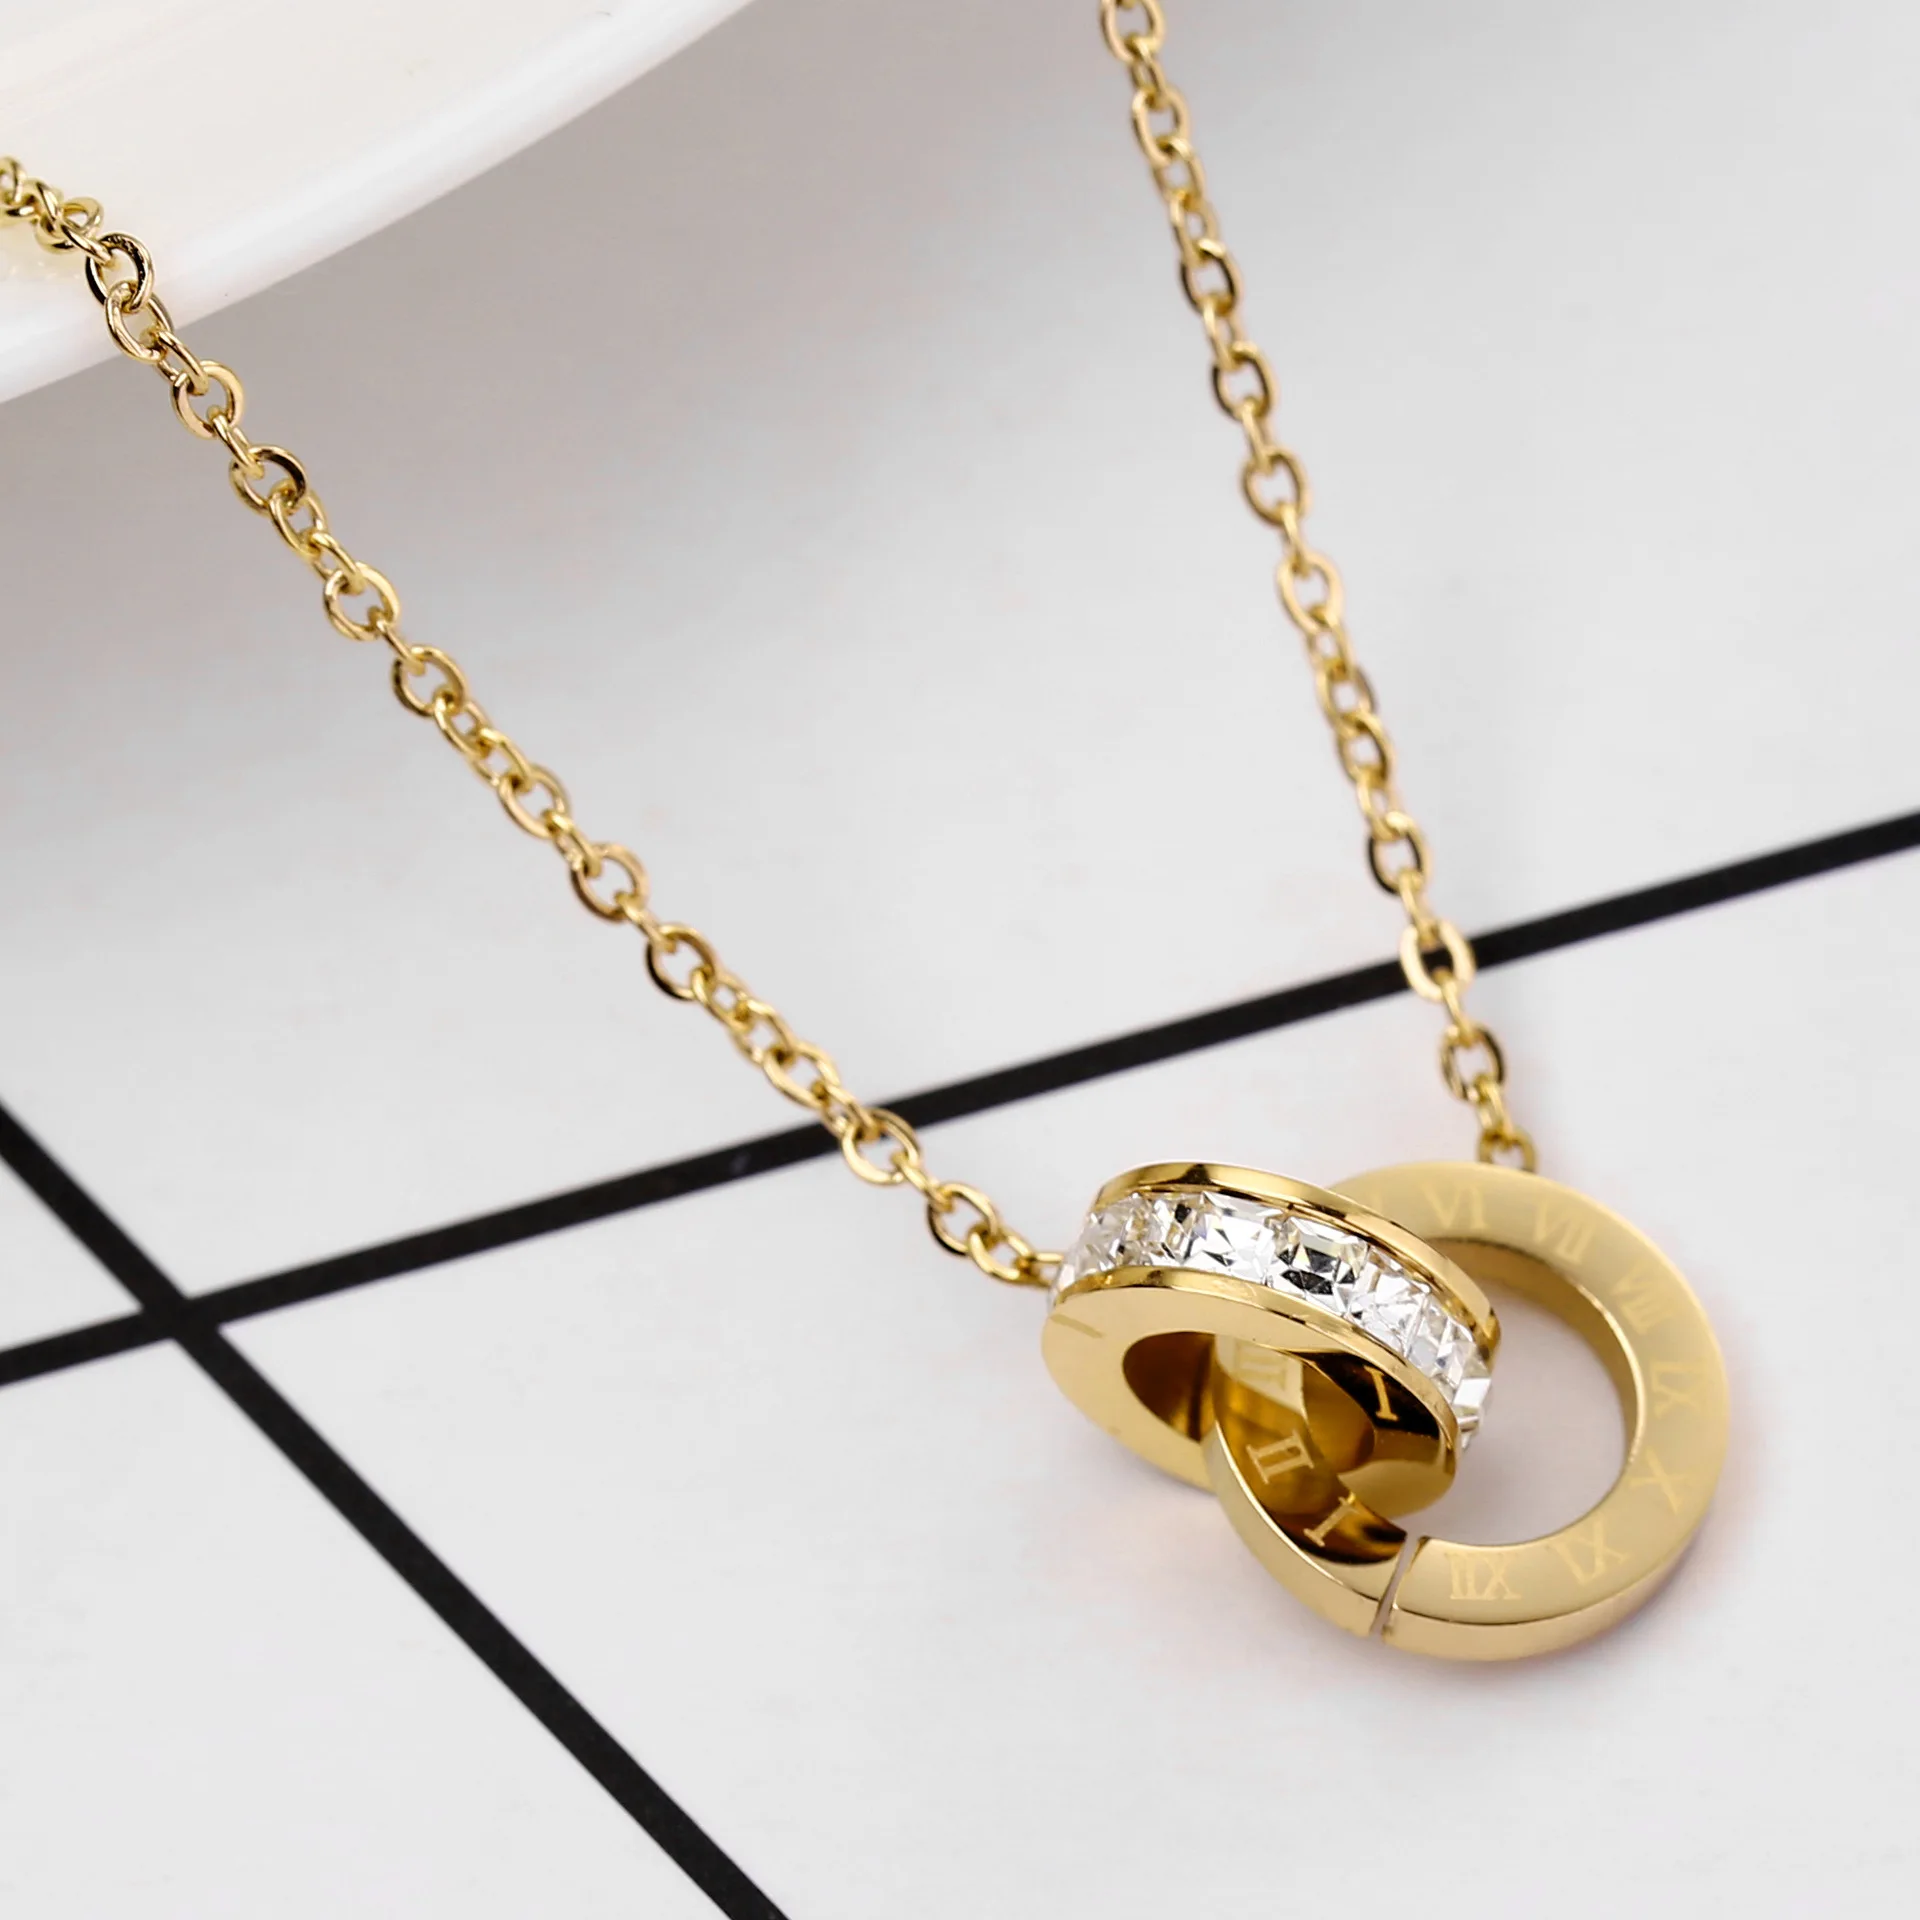 

New In and Minimalist tylistics Women's Stainless Steel Clavicle Chain Goldend Roman Numeral Pendant Necklaces Accessoriese.